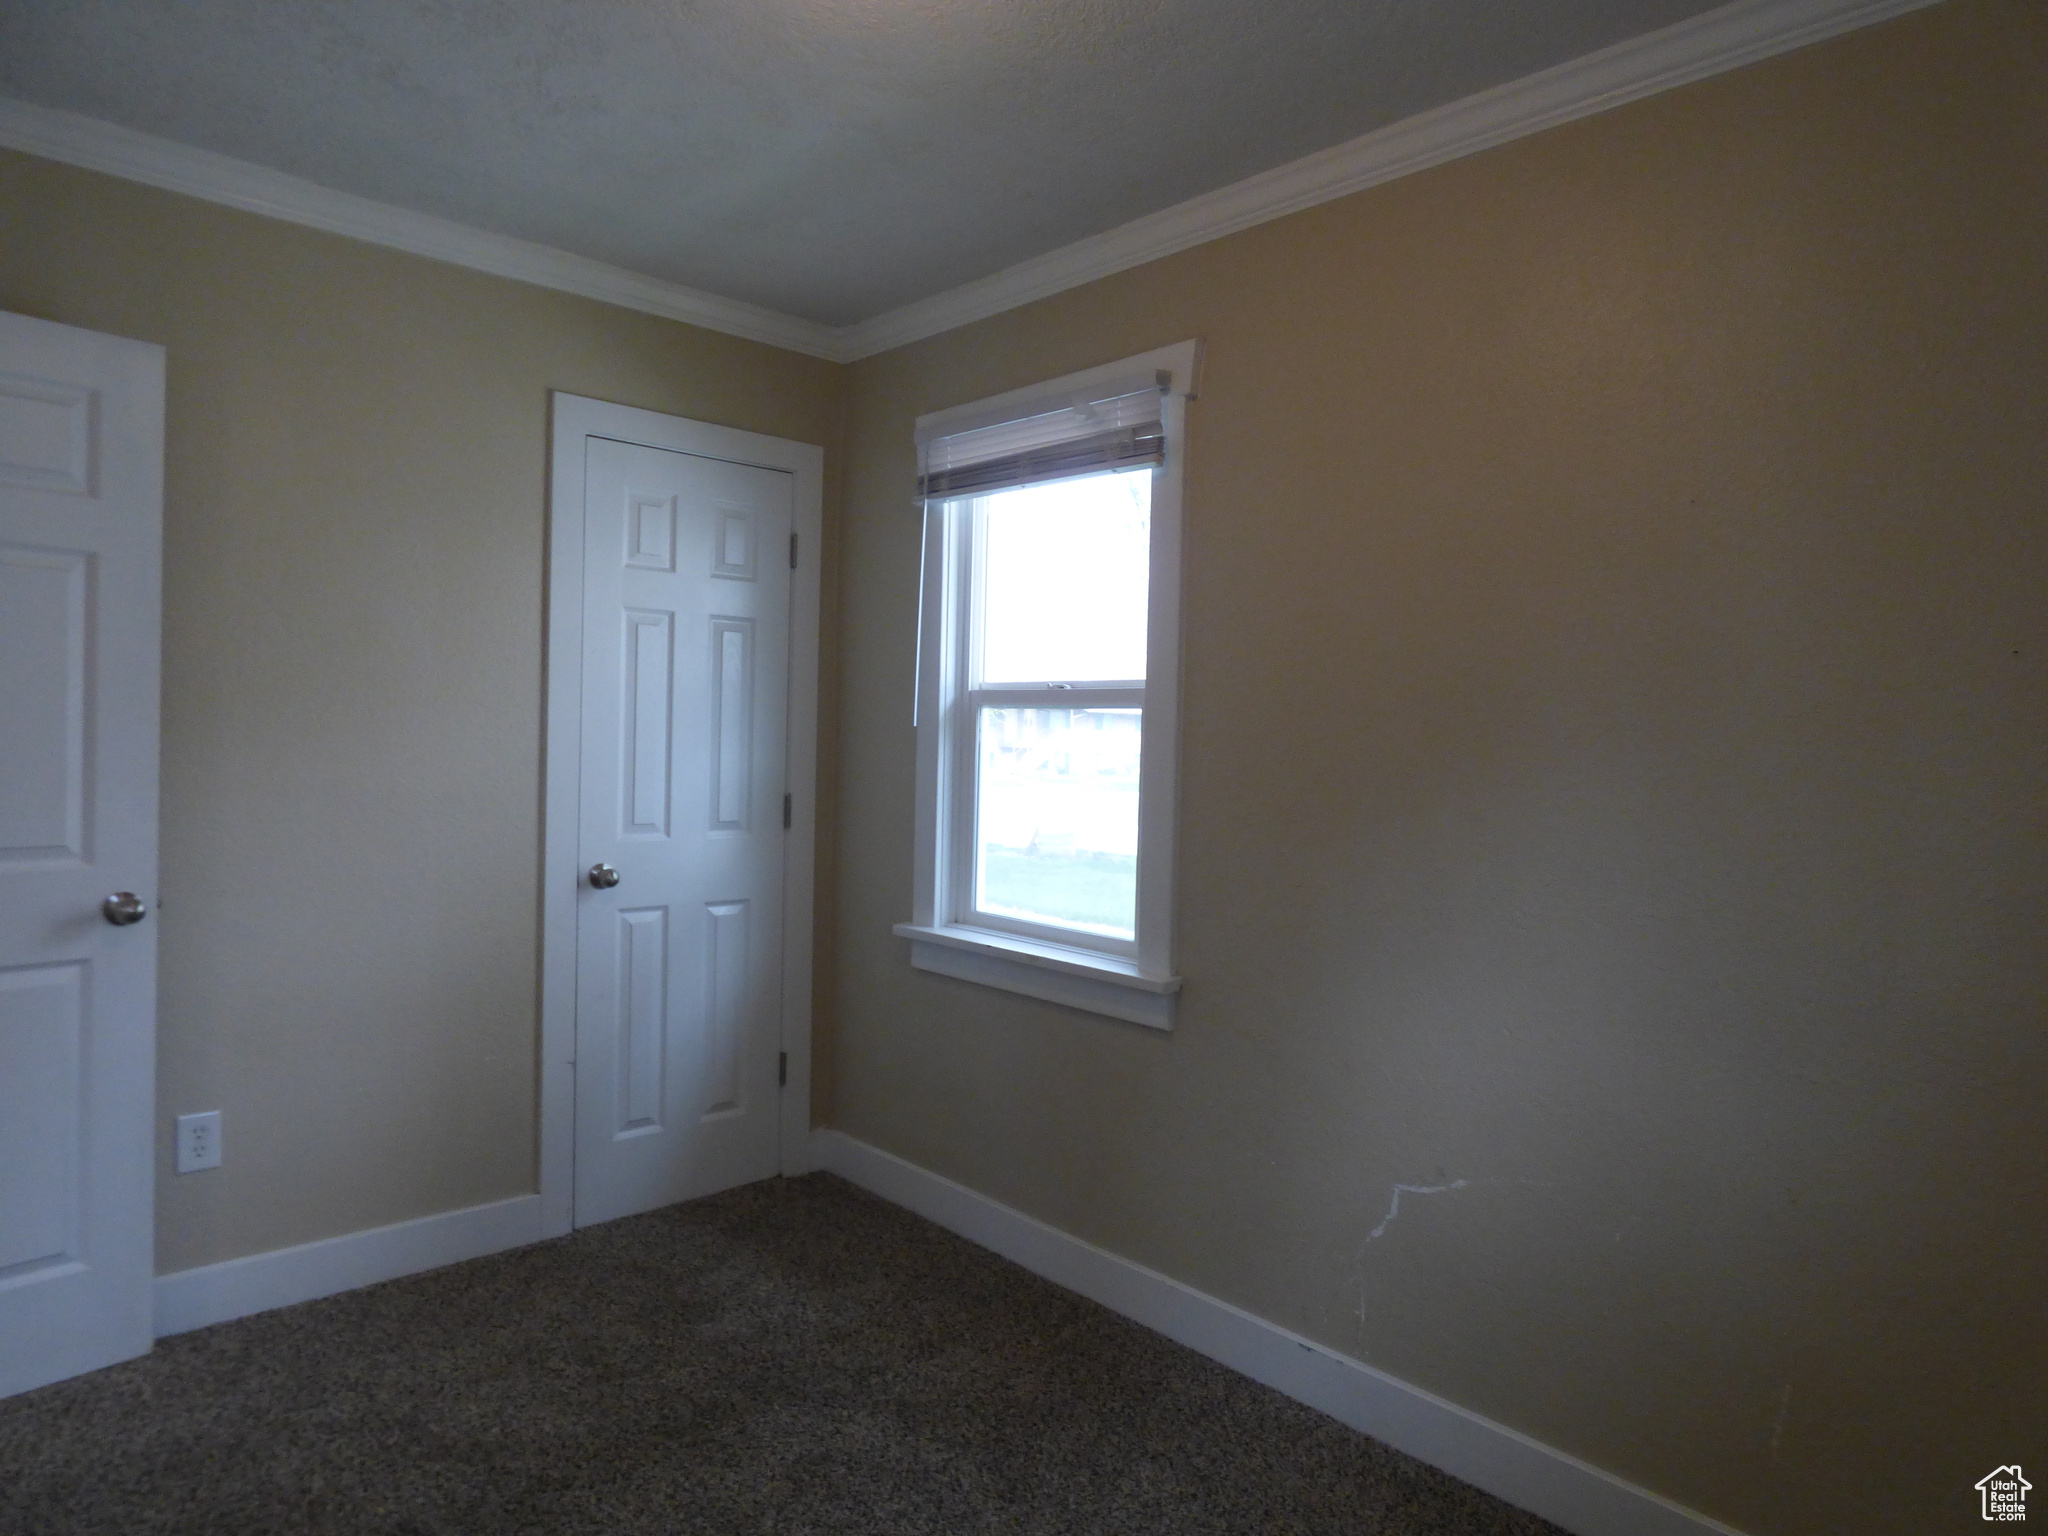 Unfurnished bedroom with ornamental molding and carpet floors